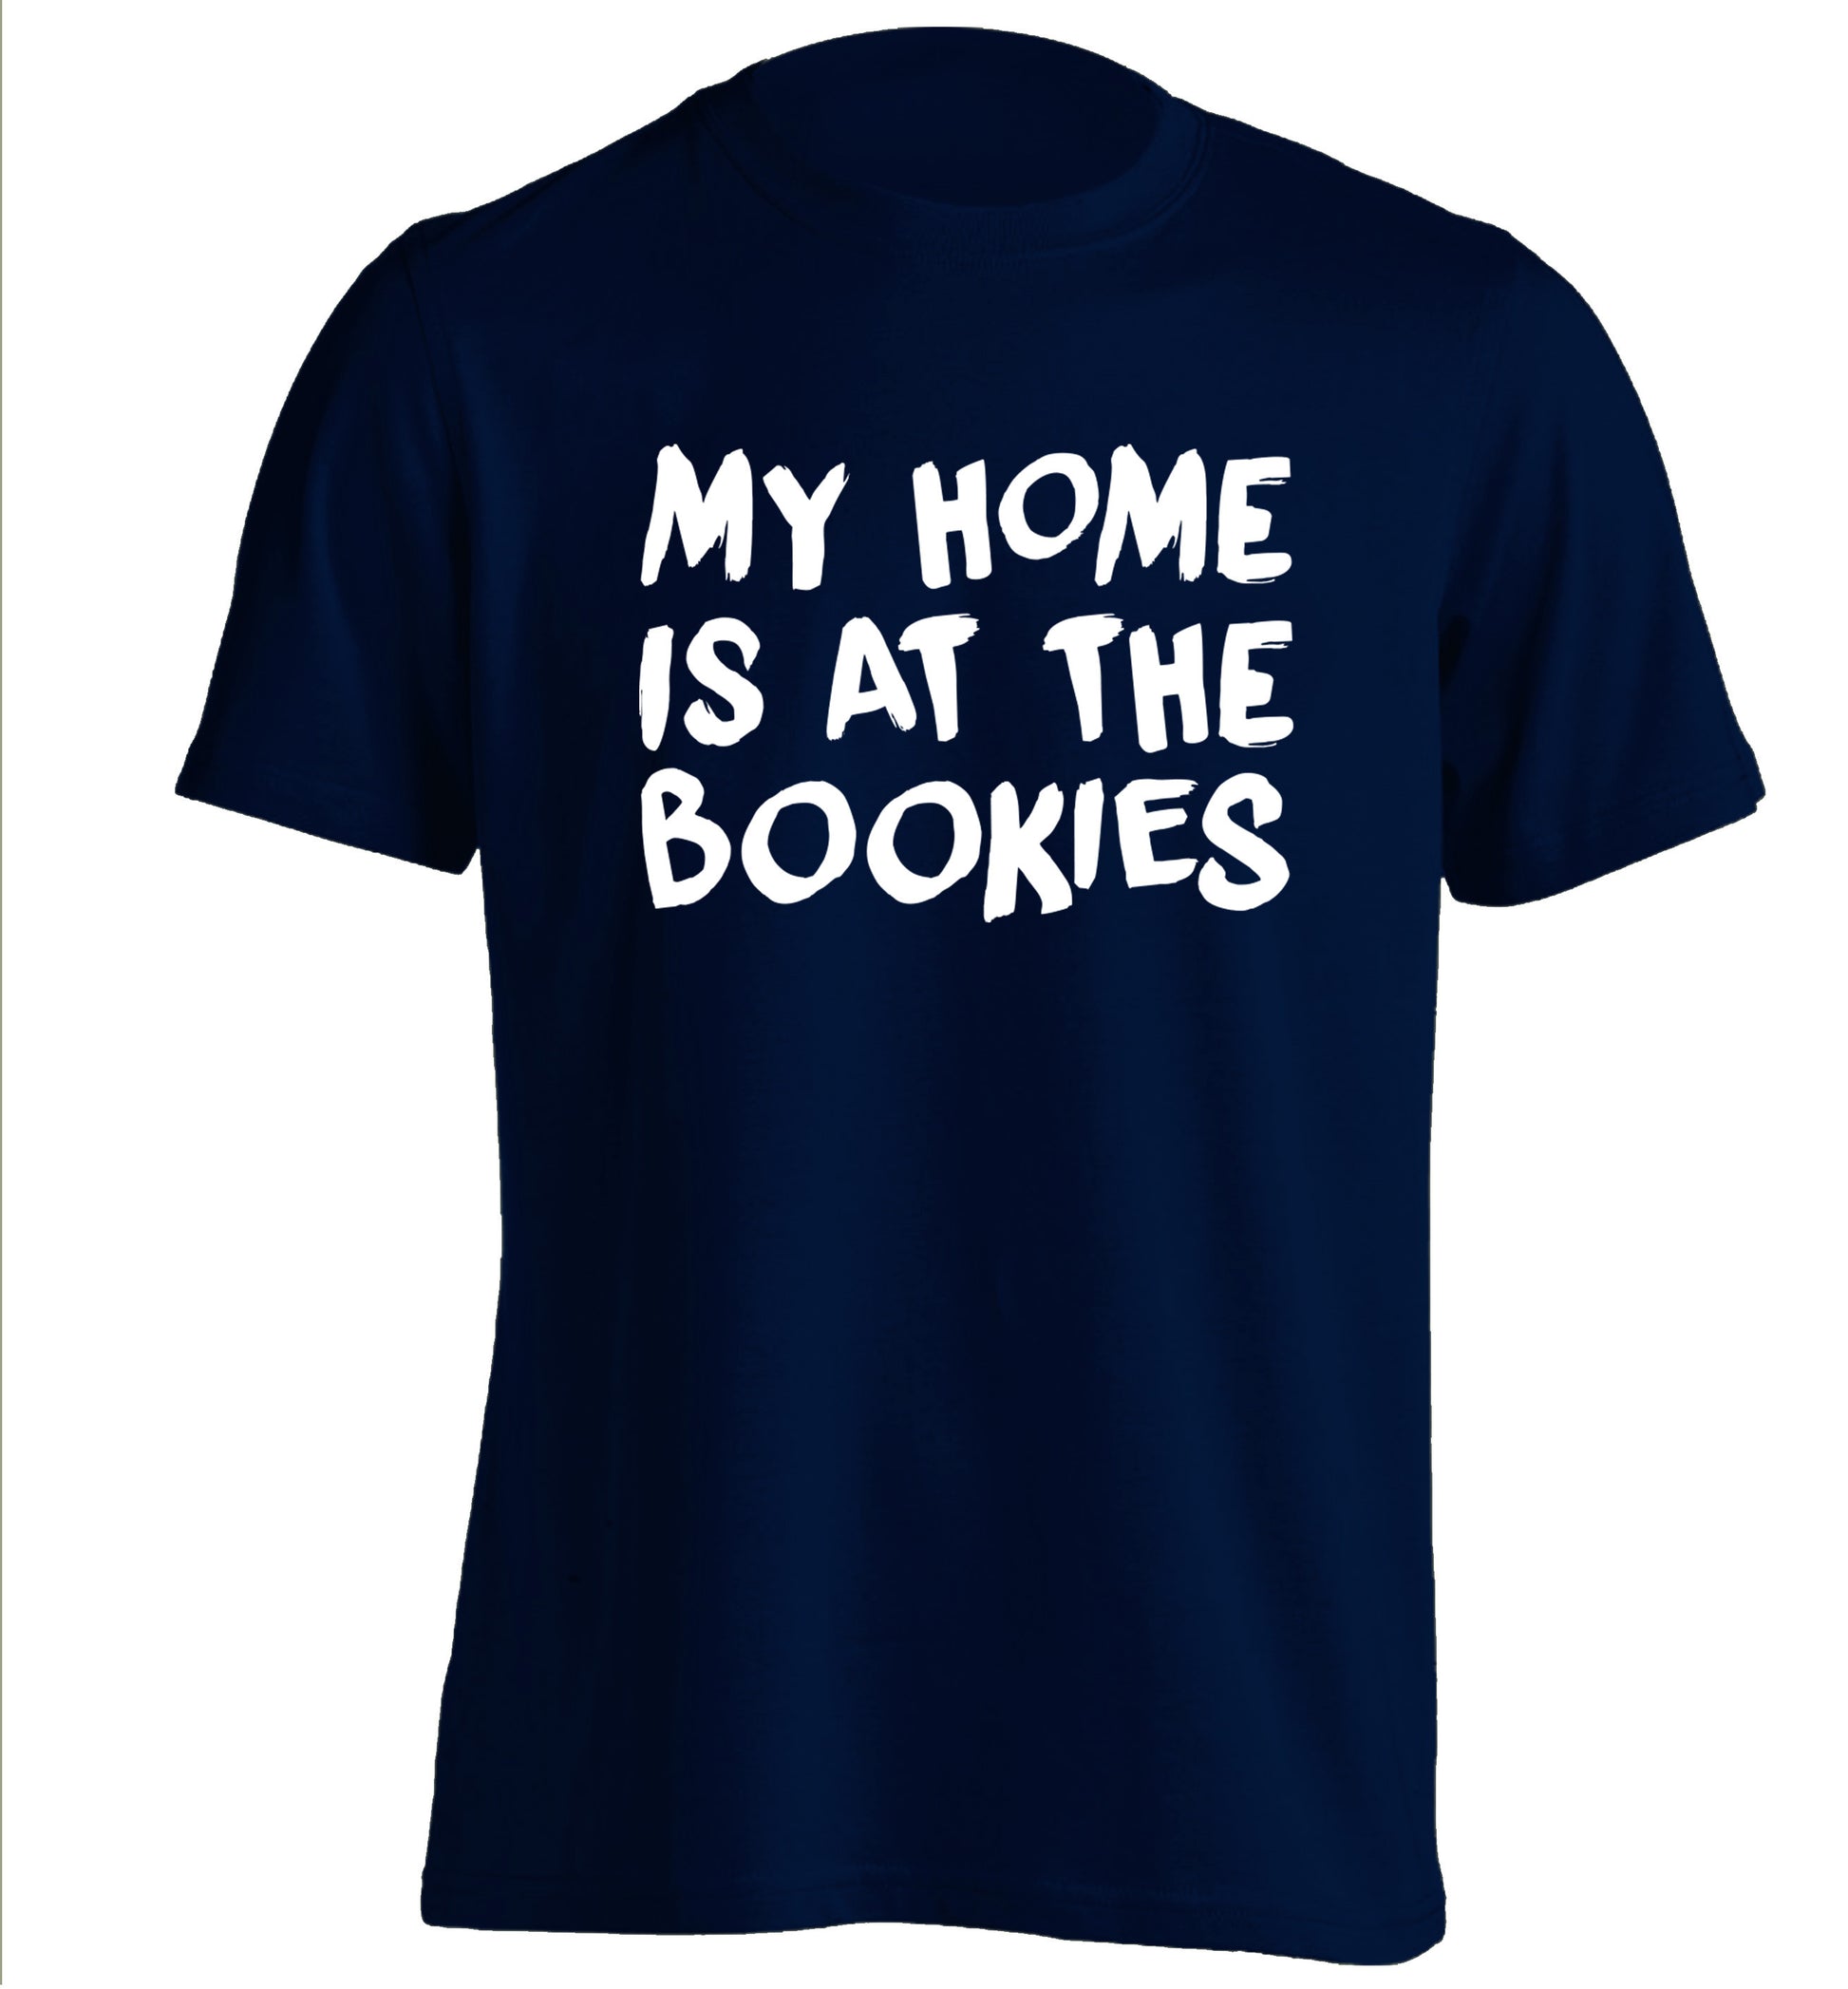 My home is at the bookies adults unisex navy Tshirt 2XL